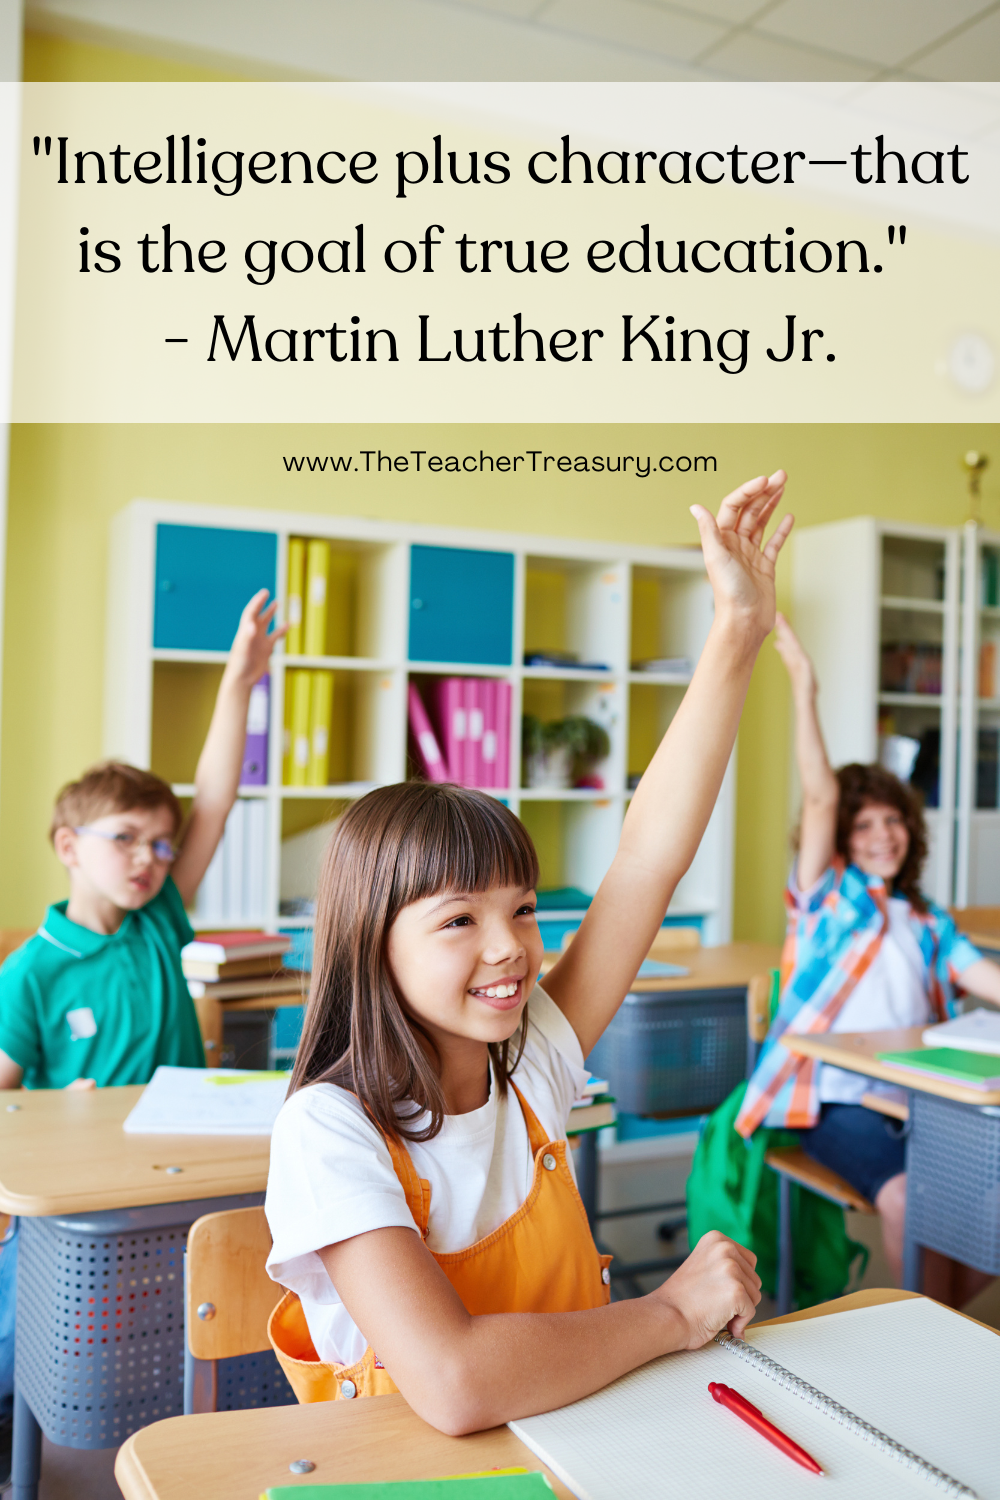 Intelligence plus character--that is the goal of true education. Martin Luther King Jr. 